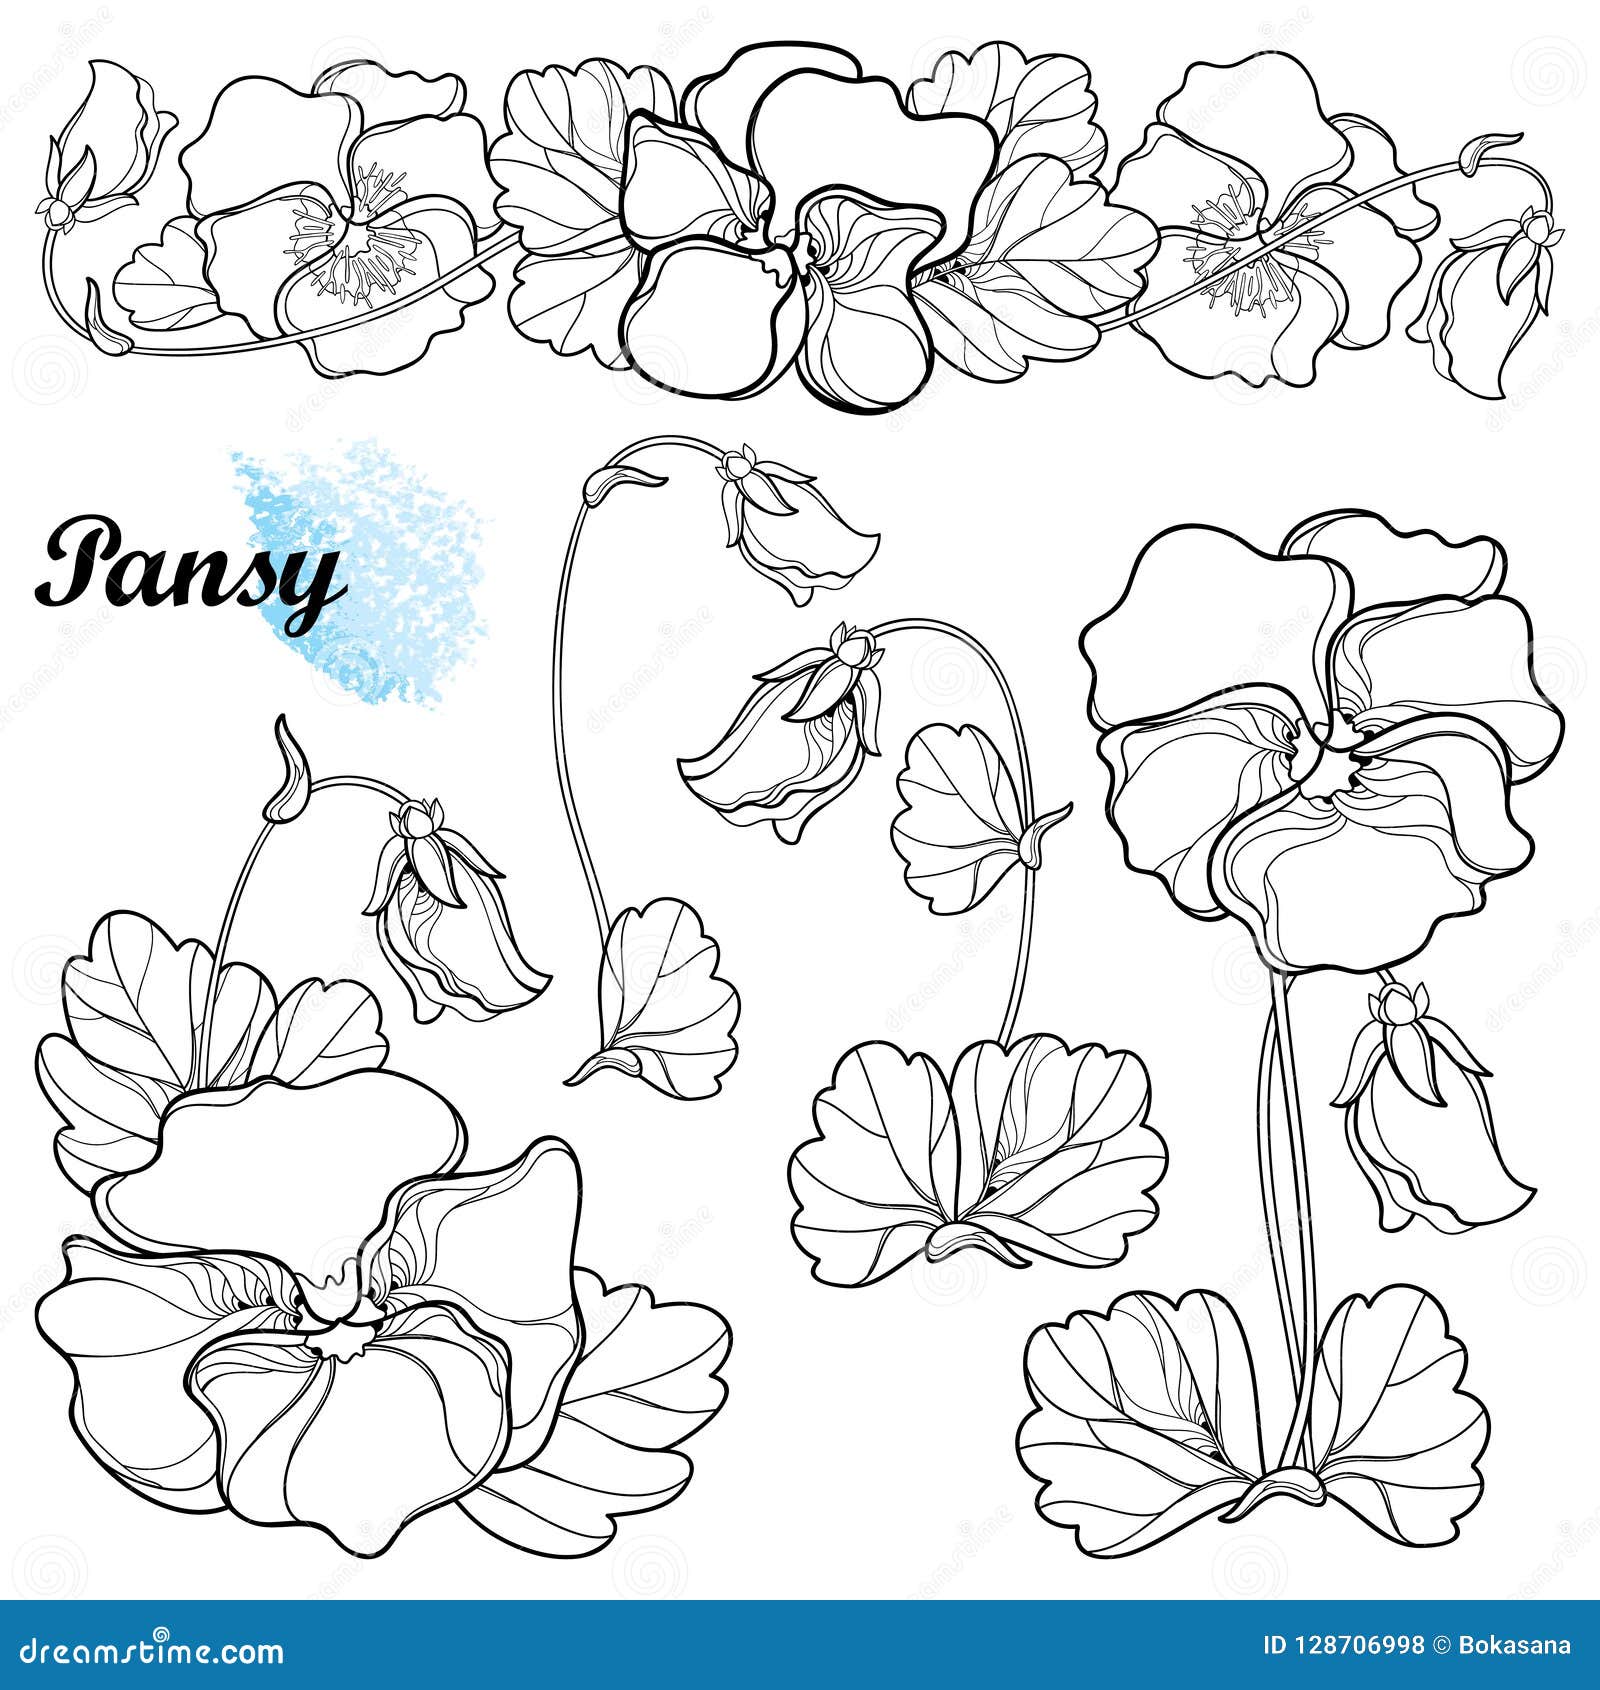  set with outline pansy or heartsease or viola tricolor flower, bud and ornate leaf in black  on white background.